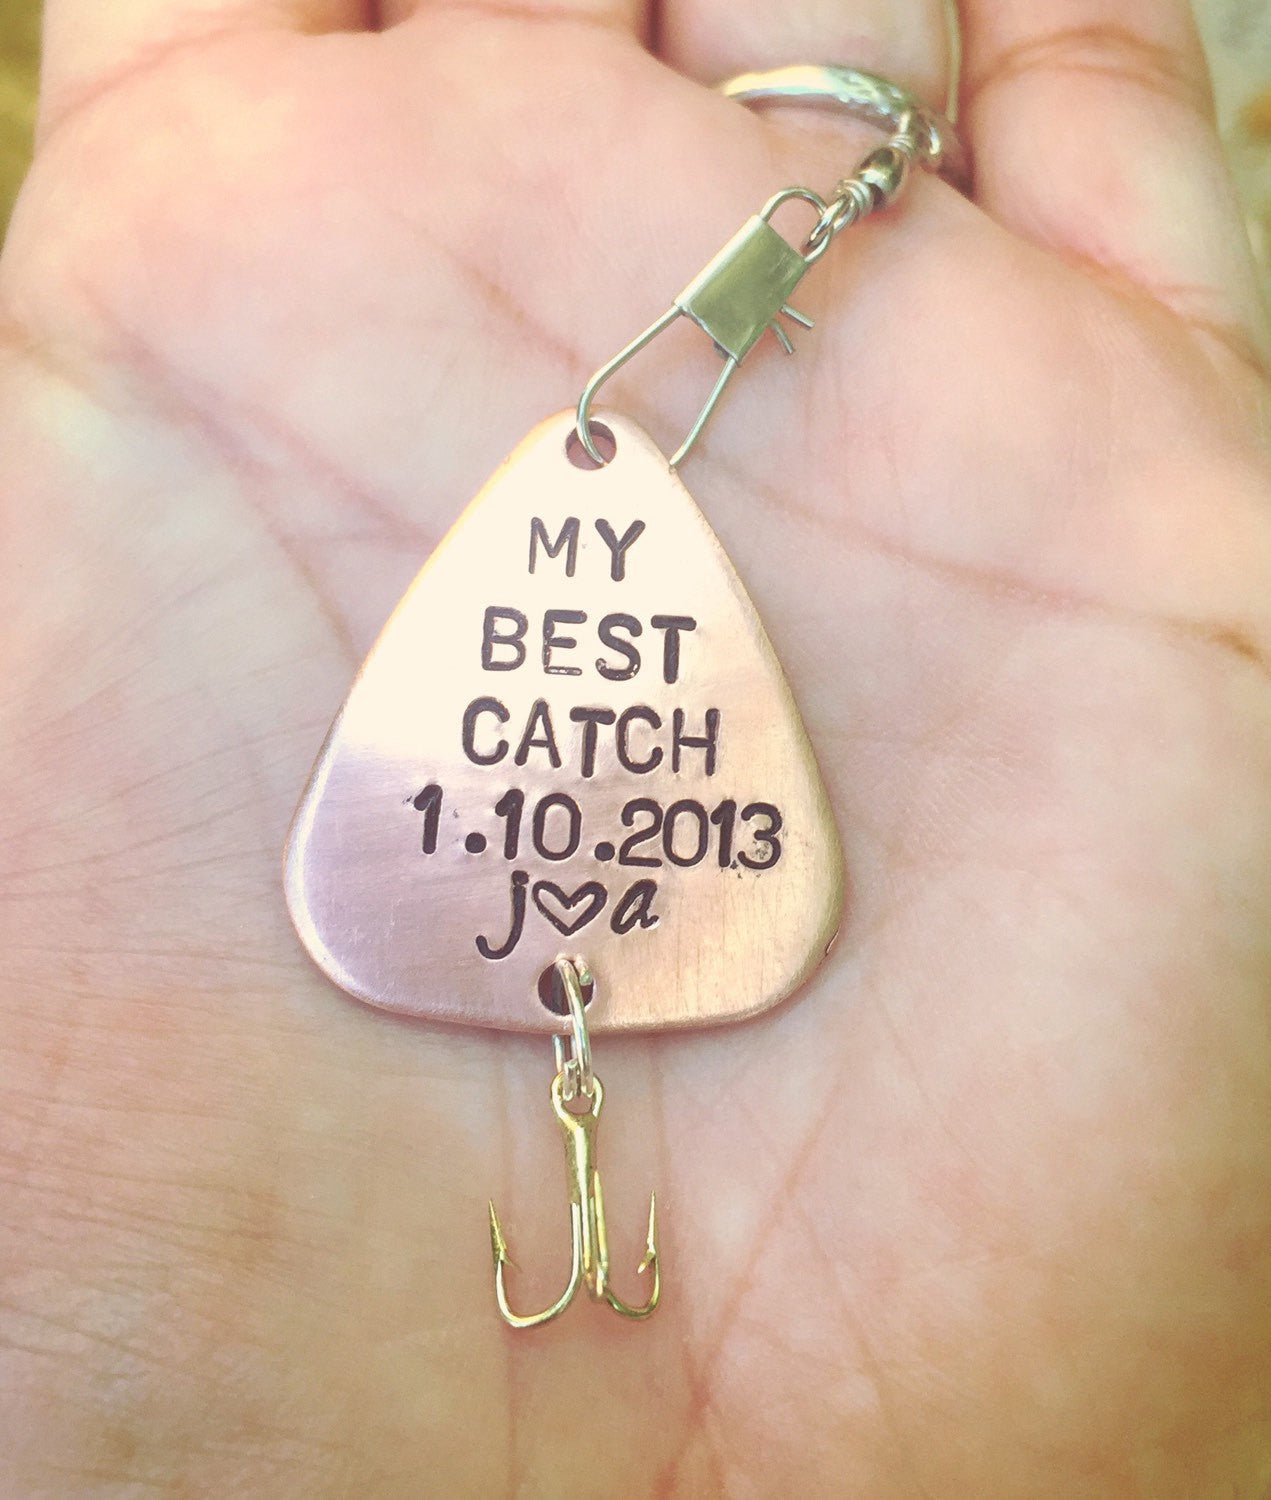 Christmas Gifts For Him, My Best Catch Fishing Keychain, Hooked On